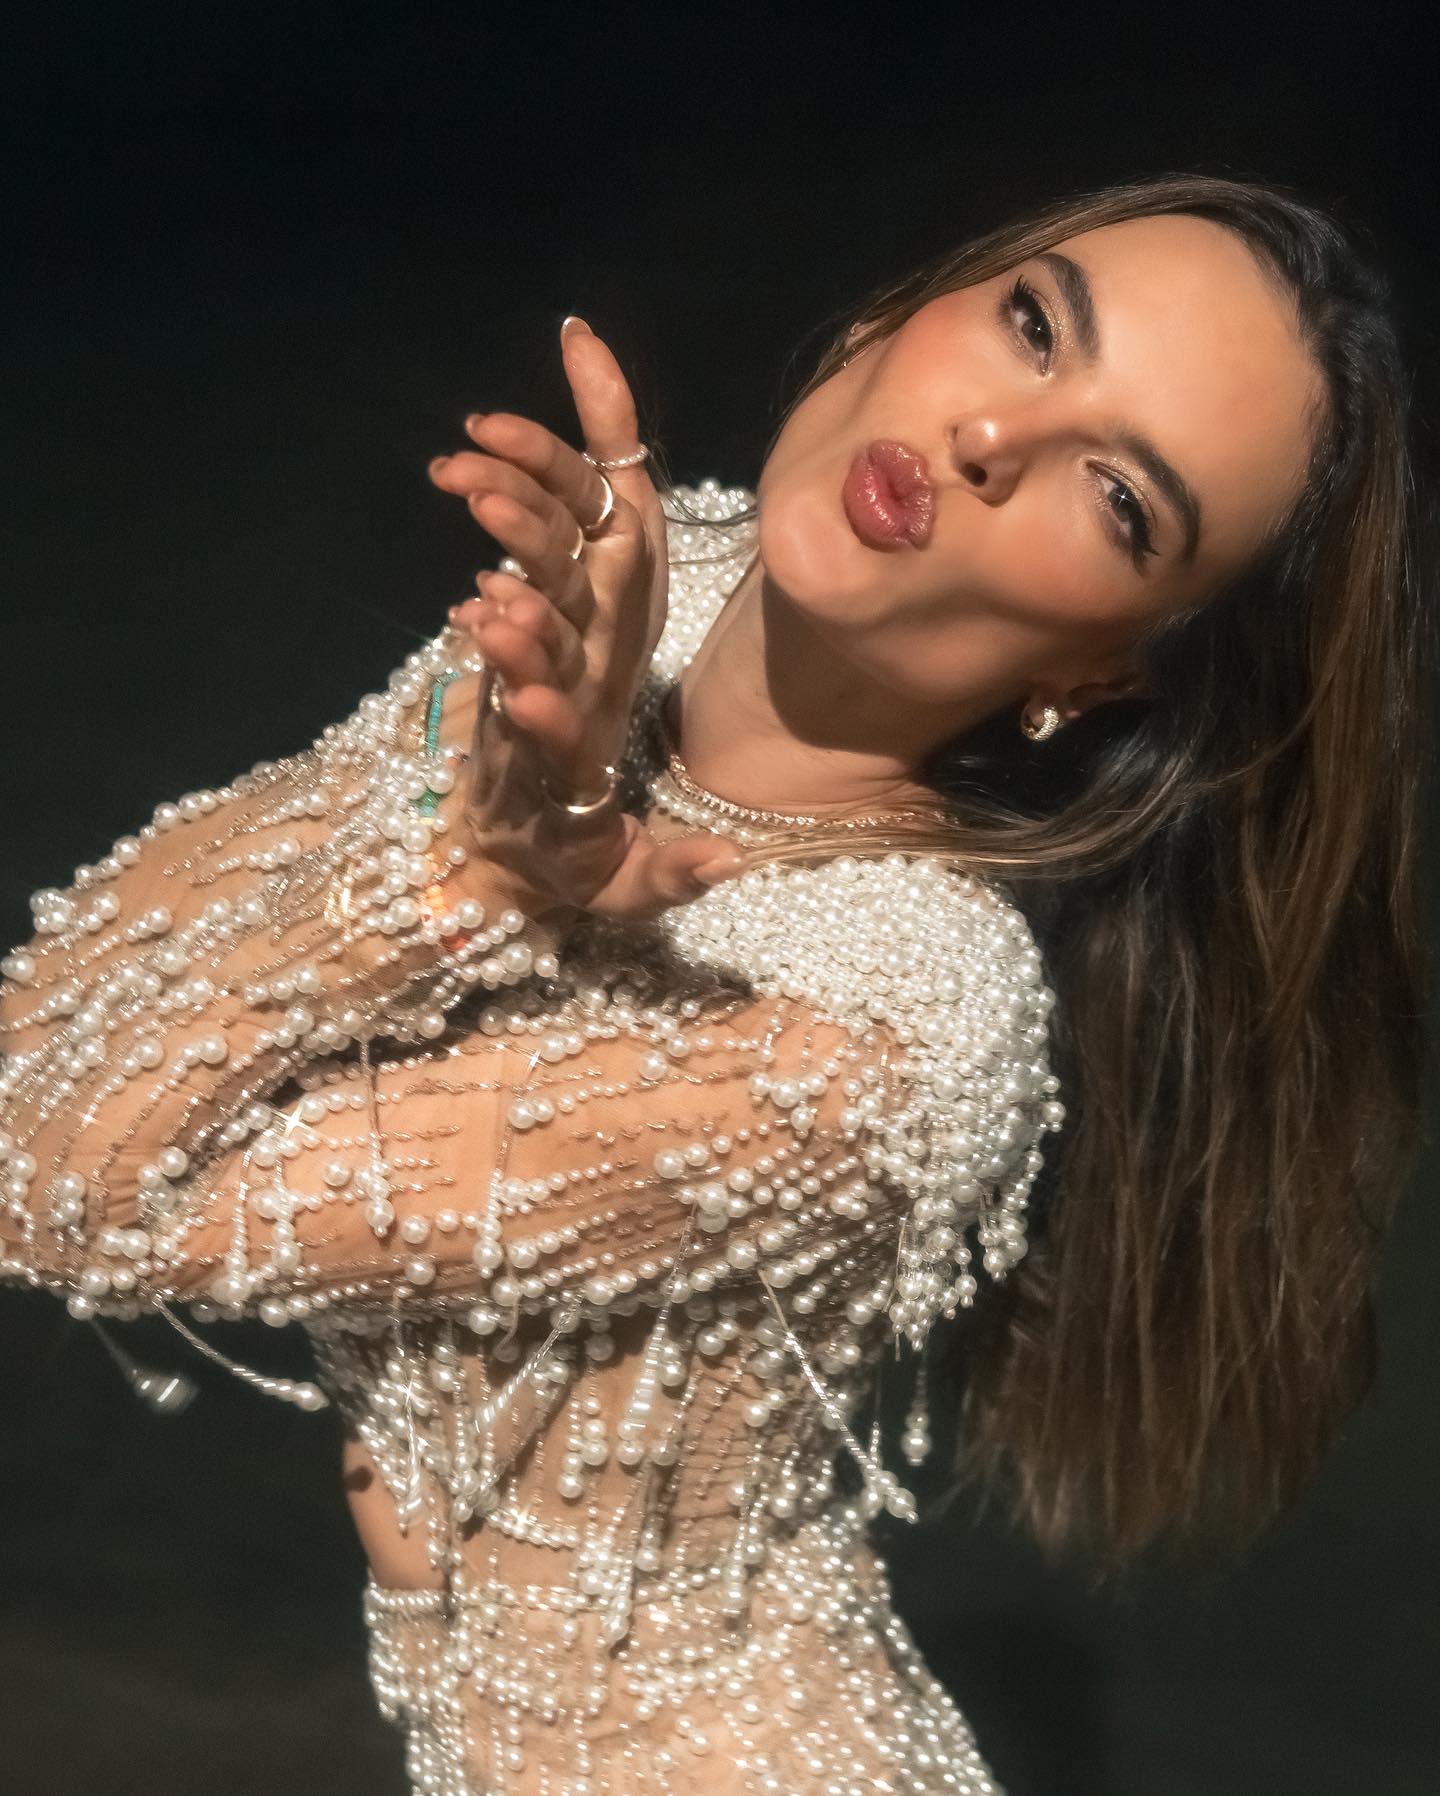 Photos n°8 : Alessandra Ambrosio is Making Waves!